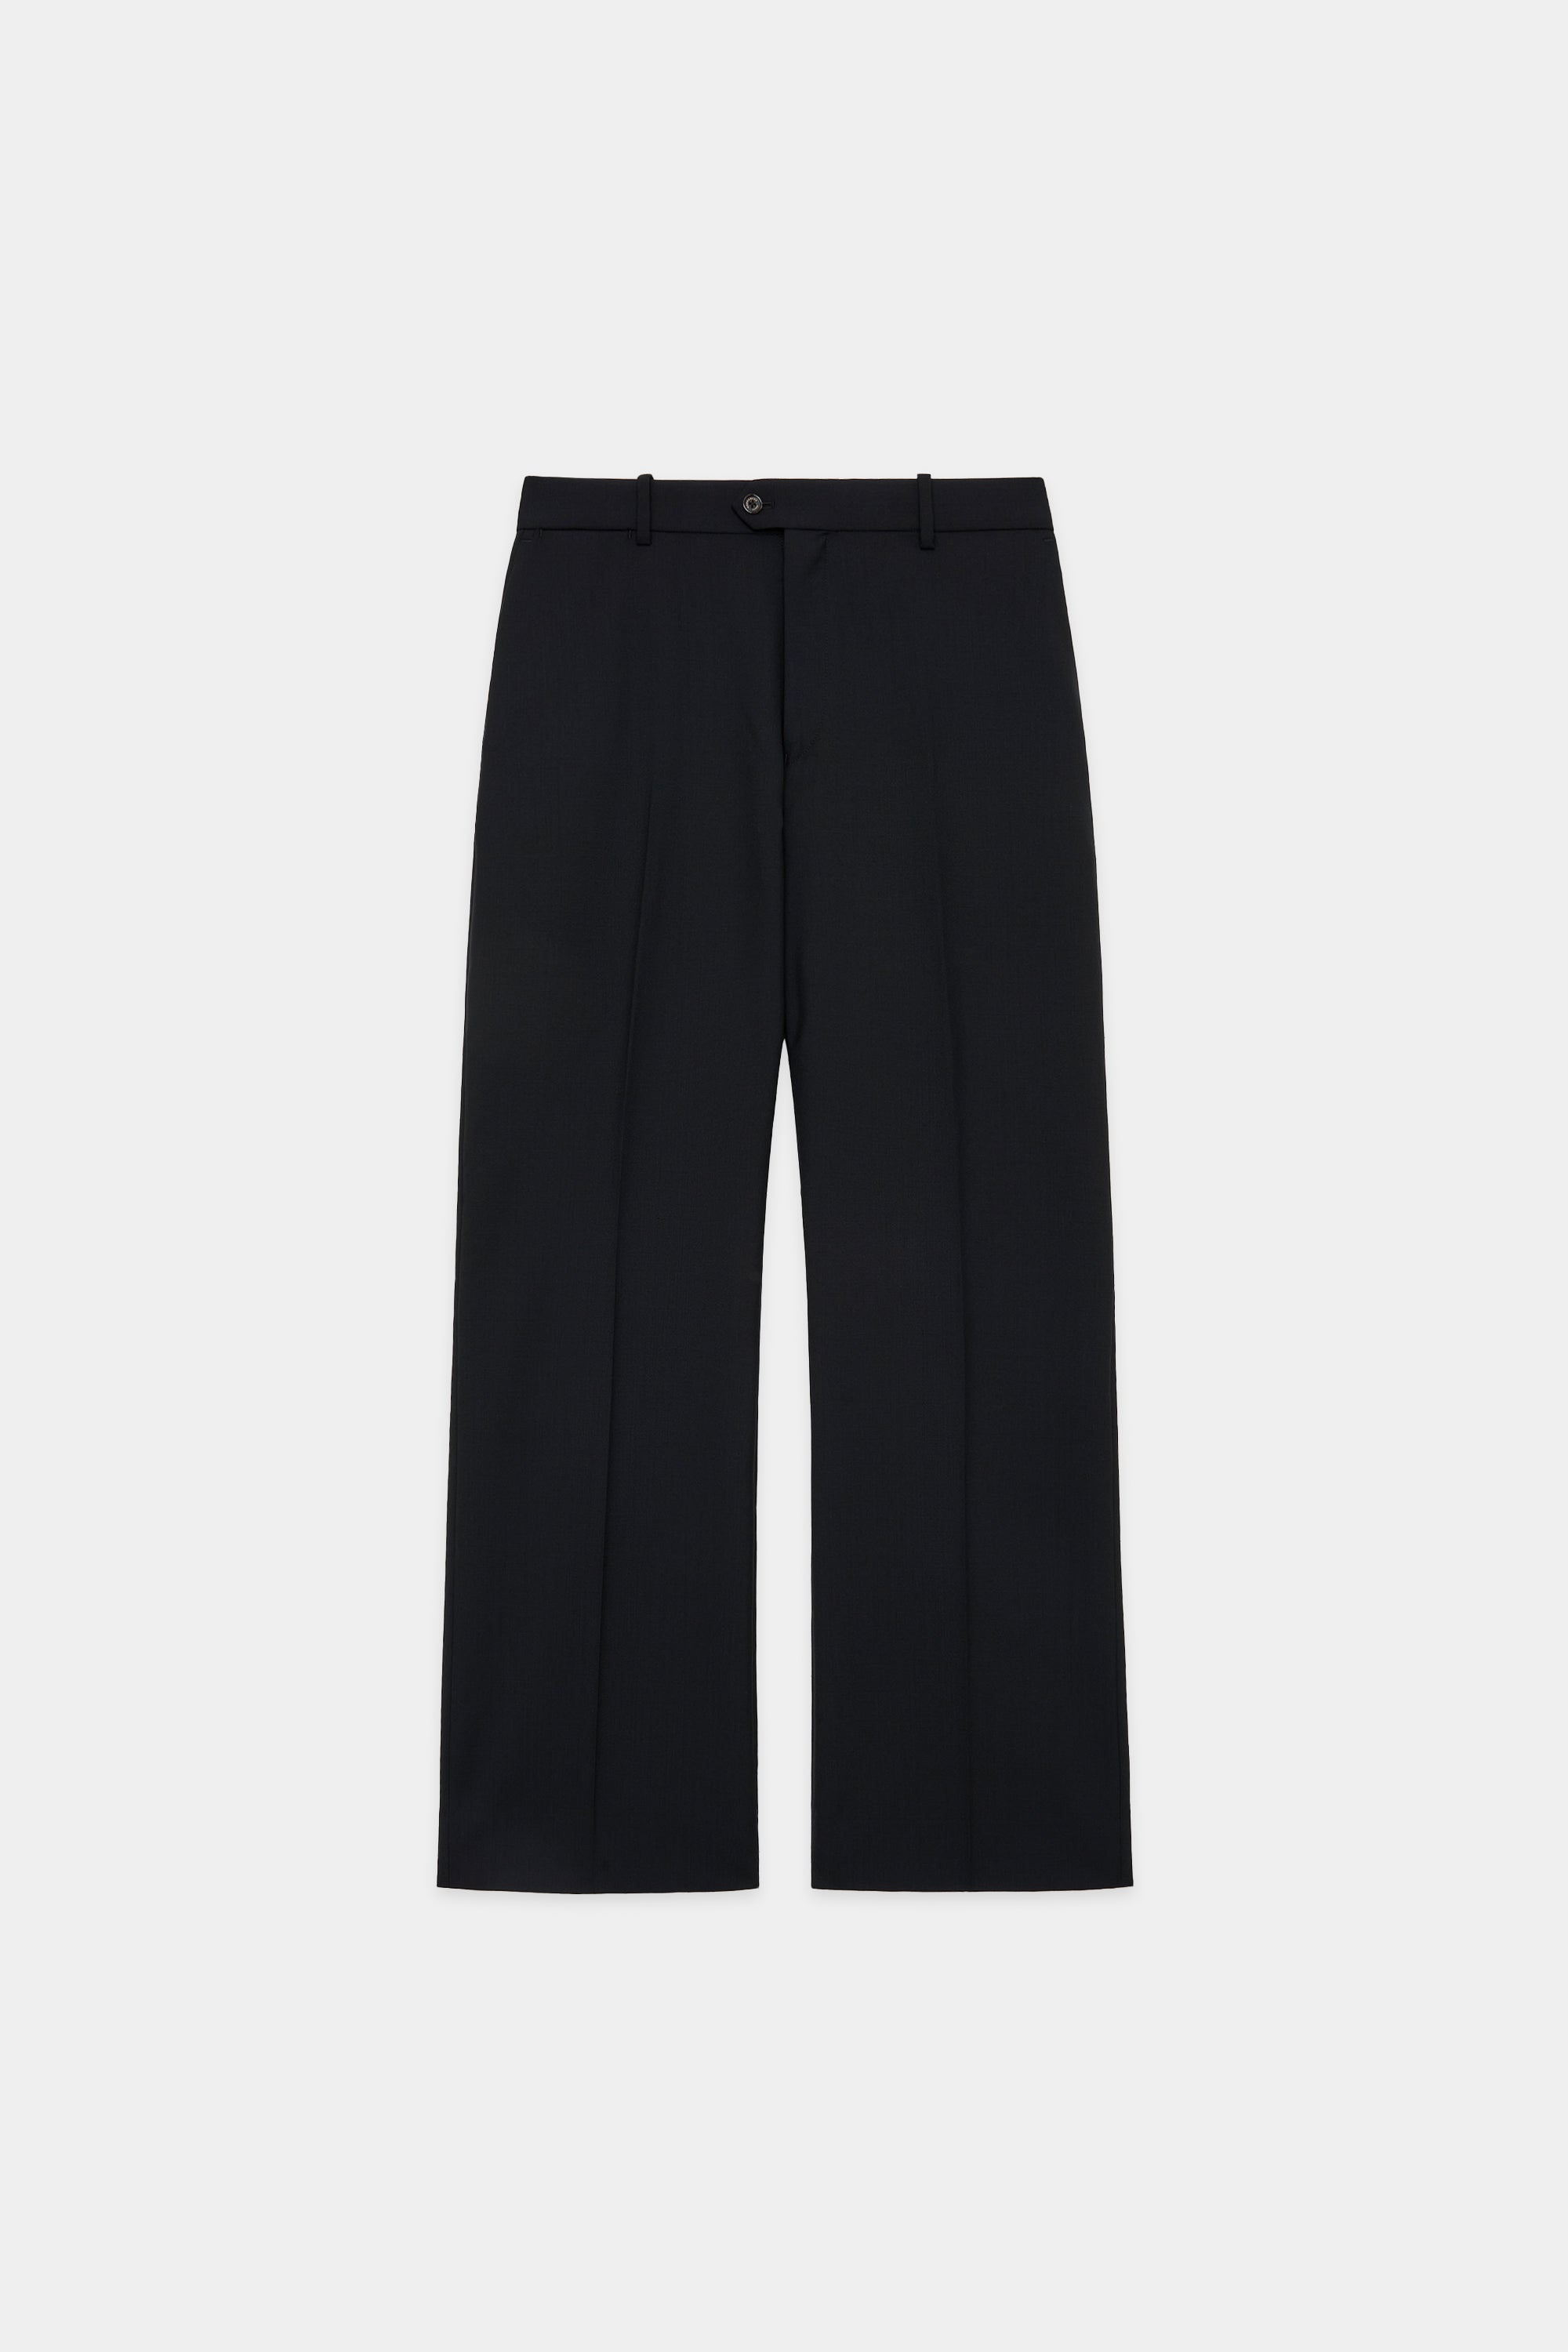 ORGANIC WOOL TROPICAL FLAT FRONT FLAIR TROUSERS, Black